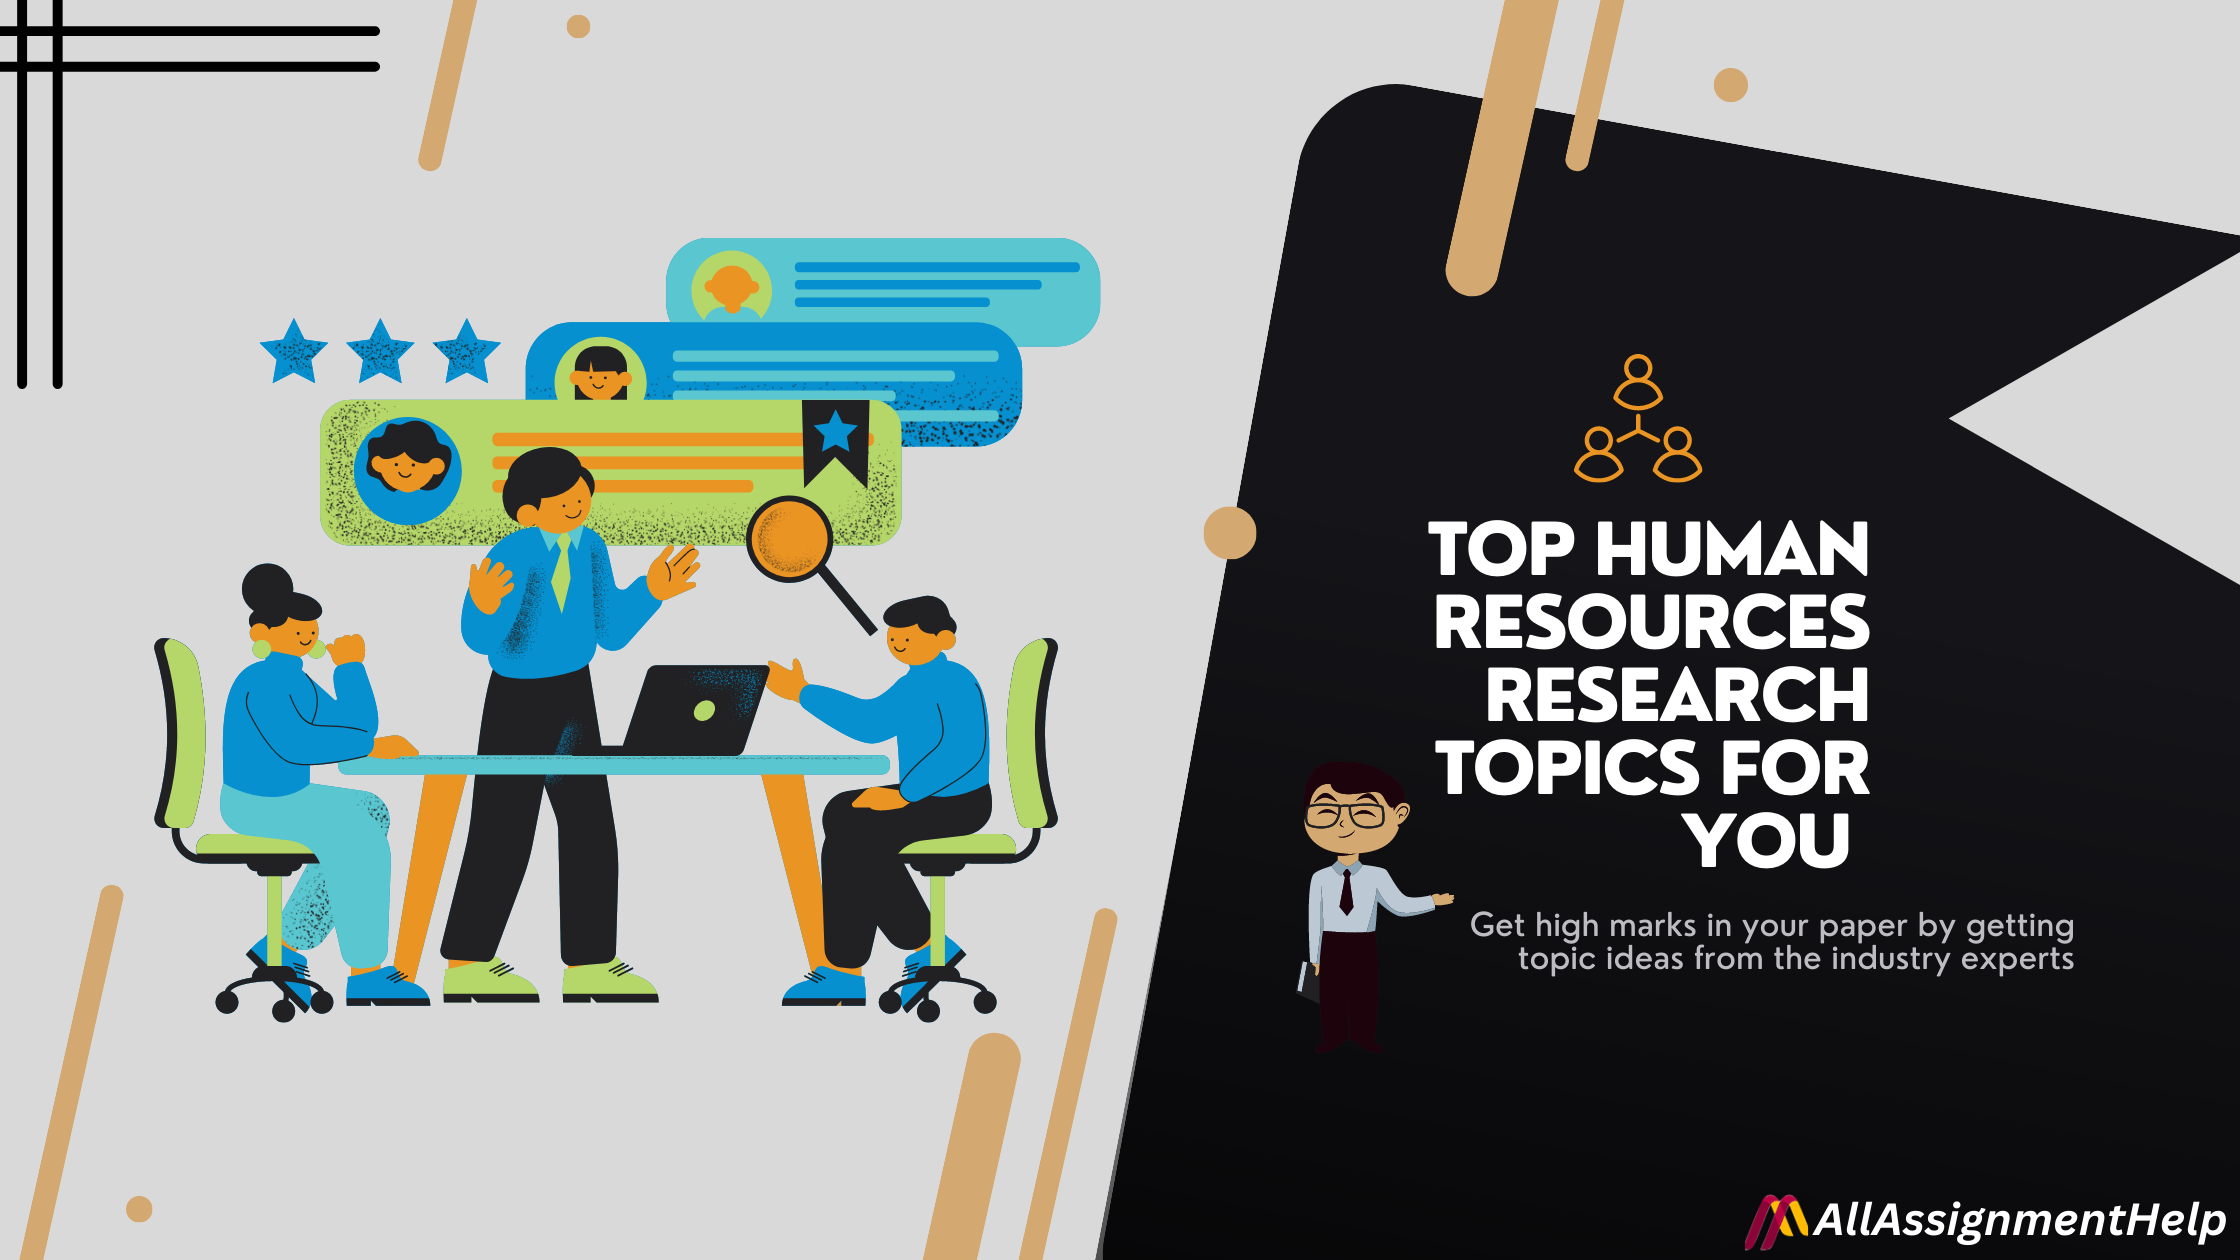 hr topics for research project